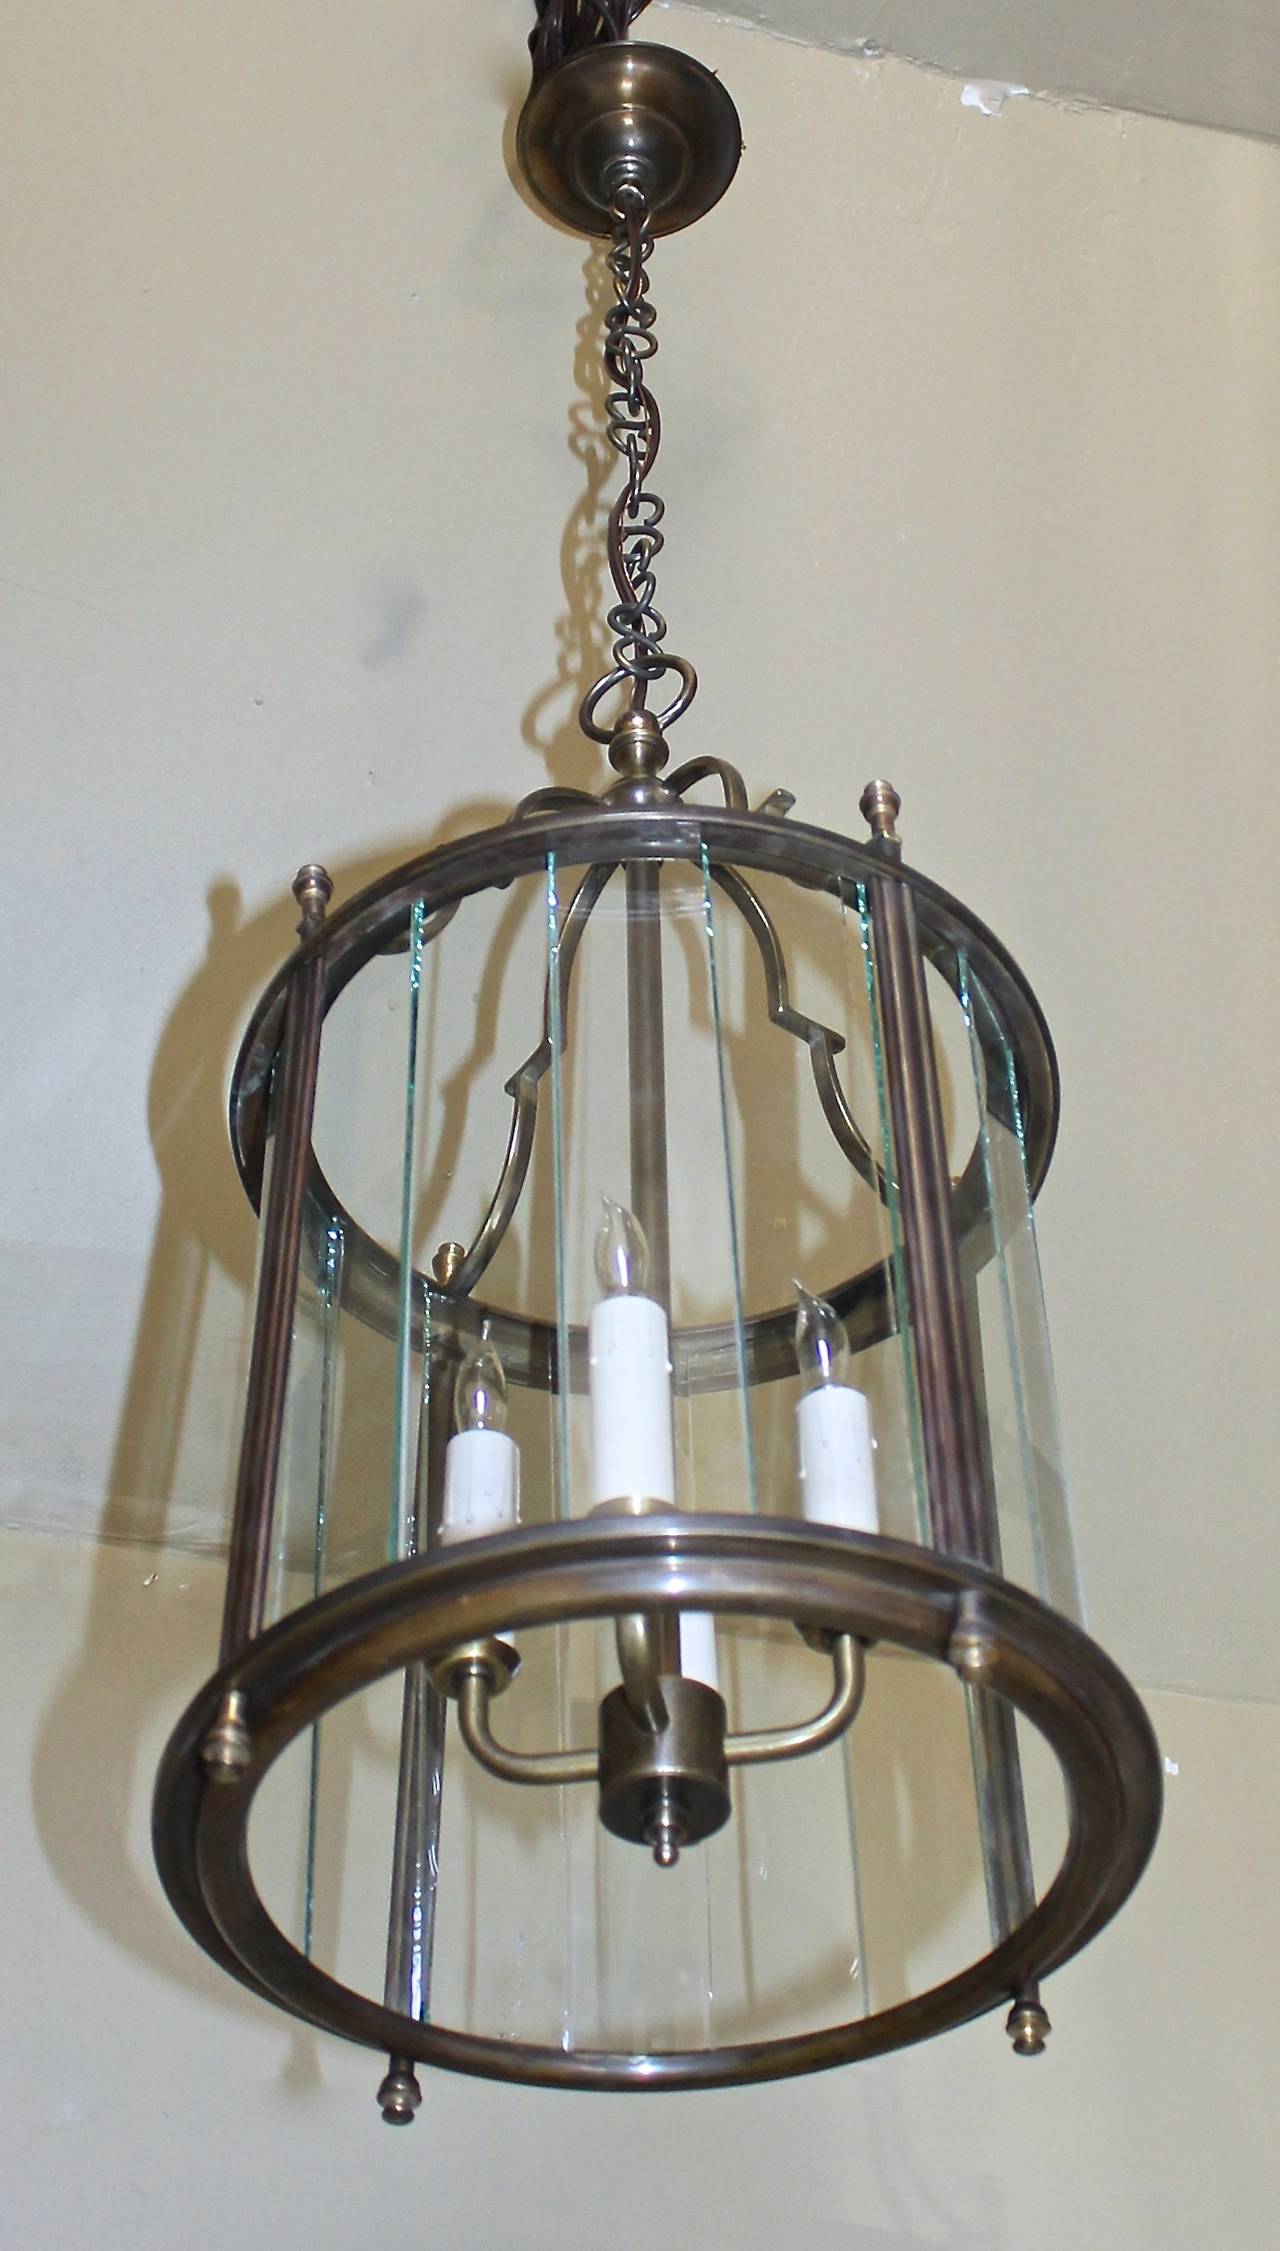 Italian brass neoclassic brass hall lantern with segmented glass panels. Uses 4 - 40 watt max candelabra base bulbs, newly wired for US. Measures: Fixture 11